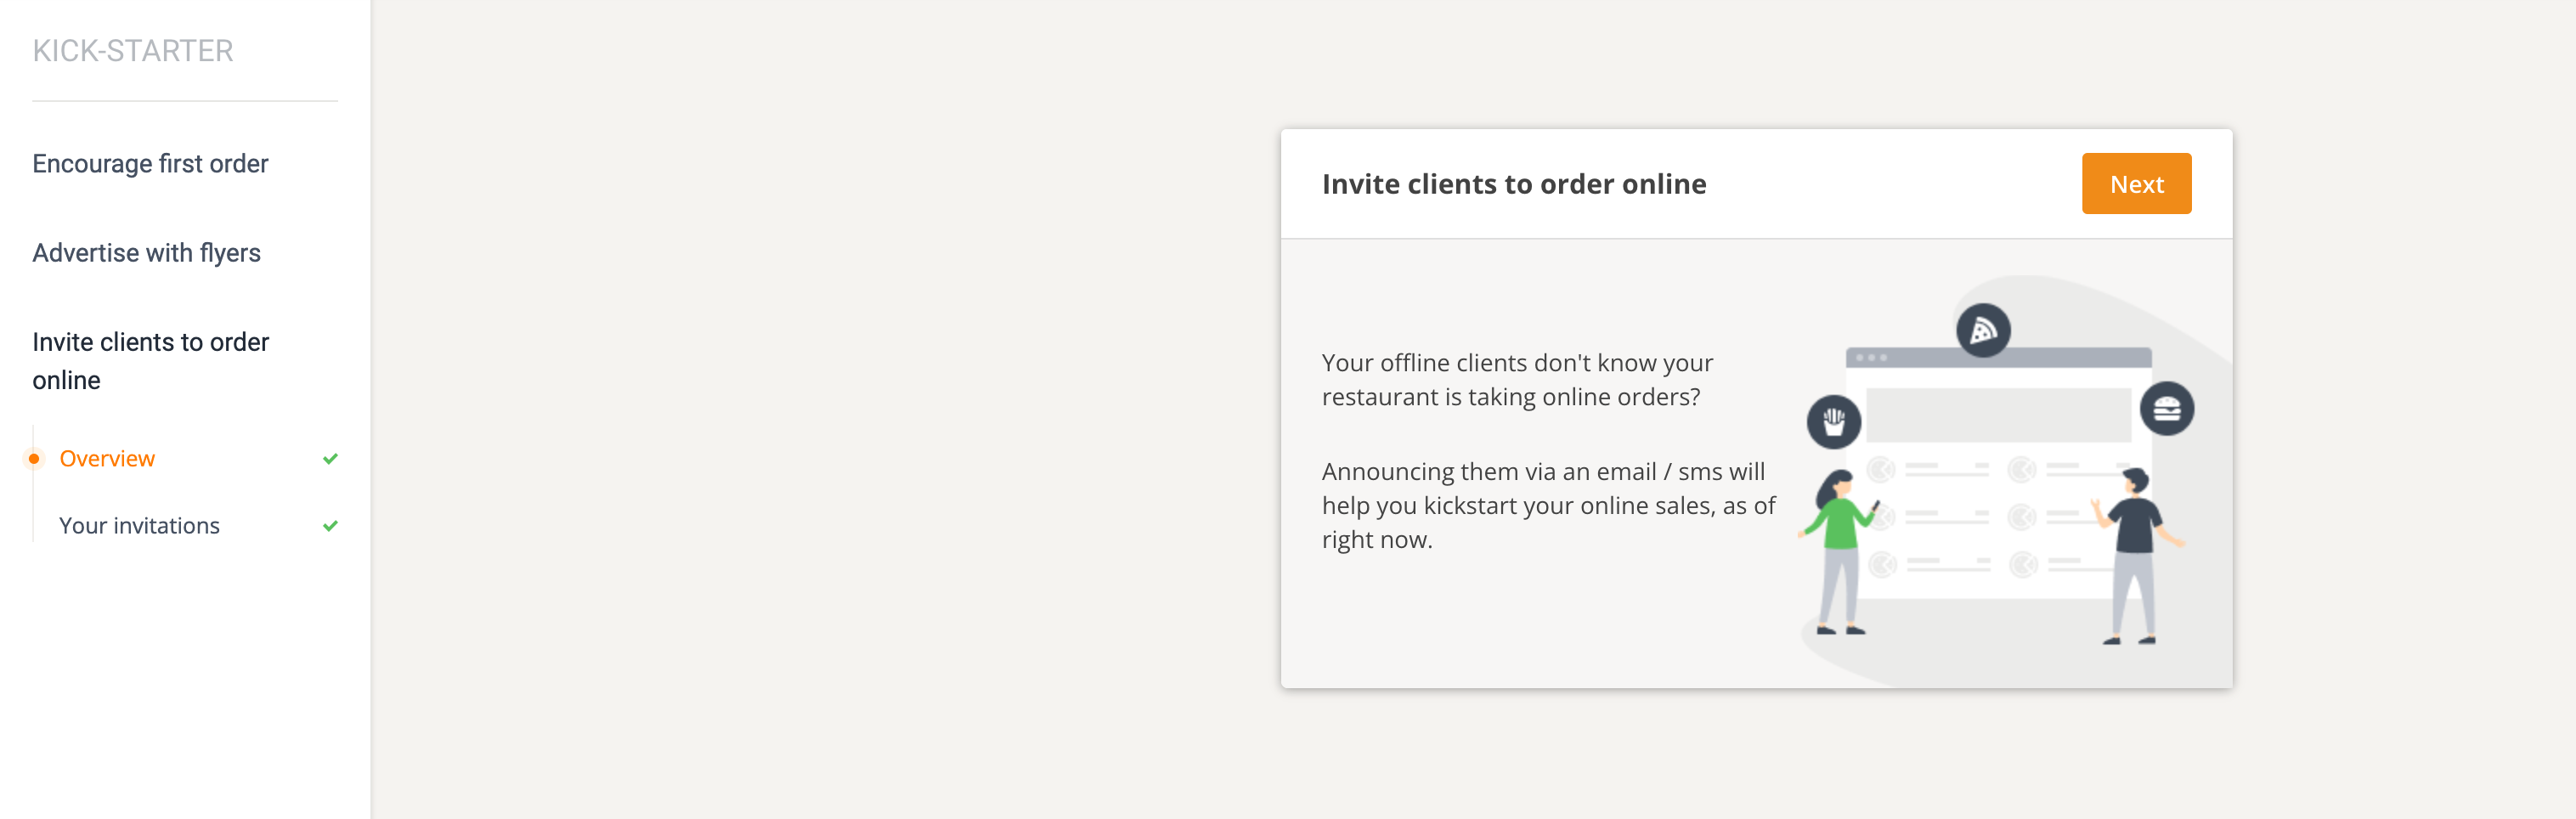 how to plan a restaurant grand opening: invite customers to order online